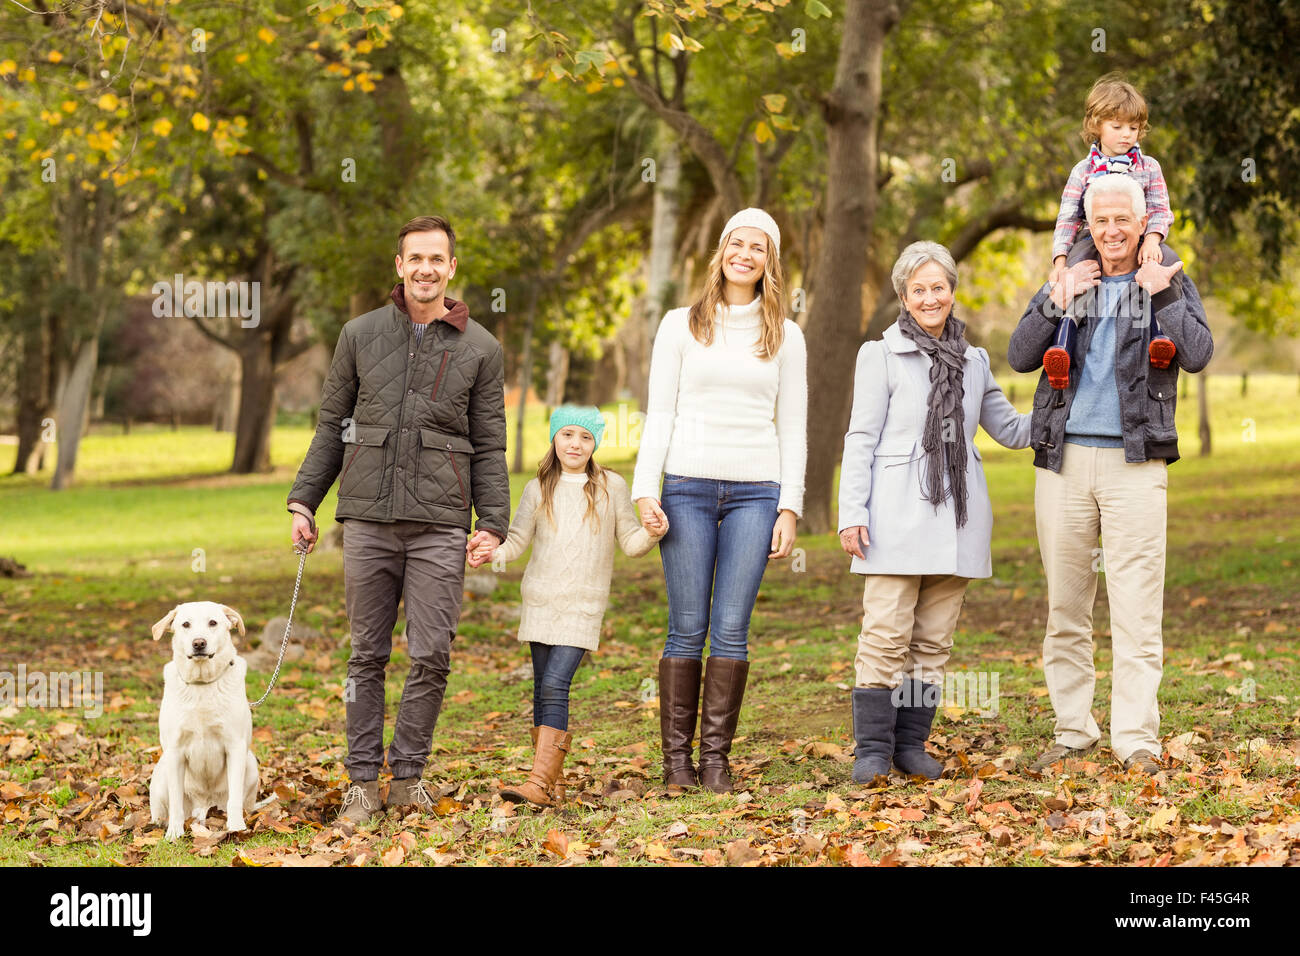 Extended family posing with warm clothes Stock Photo